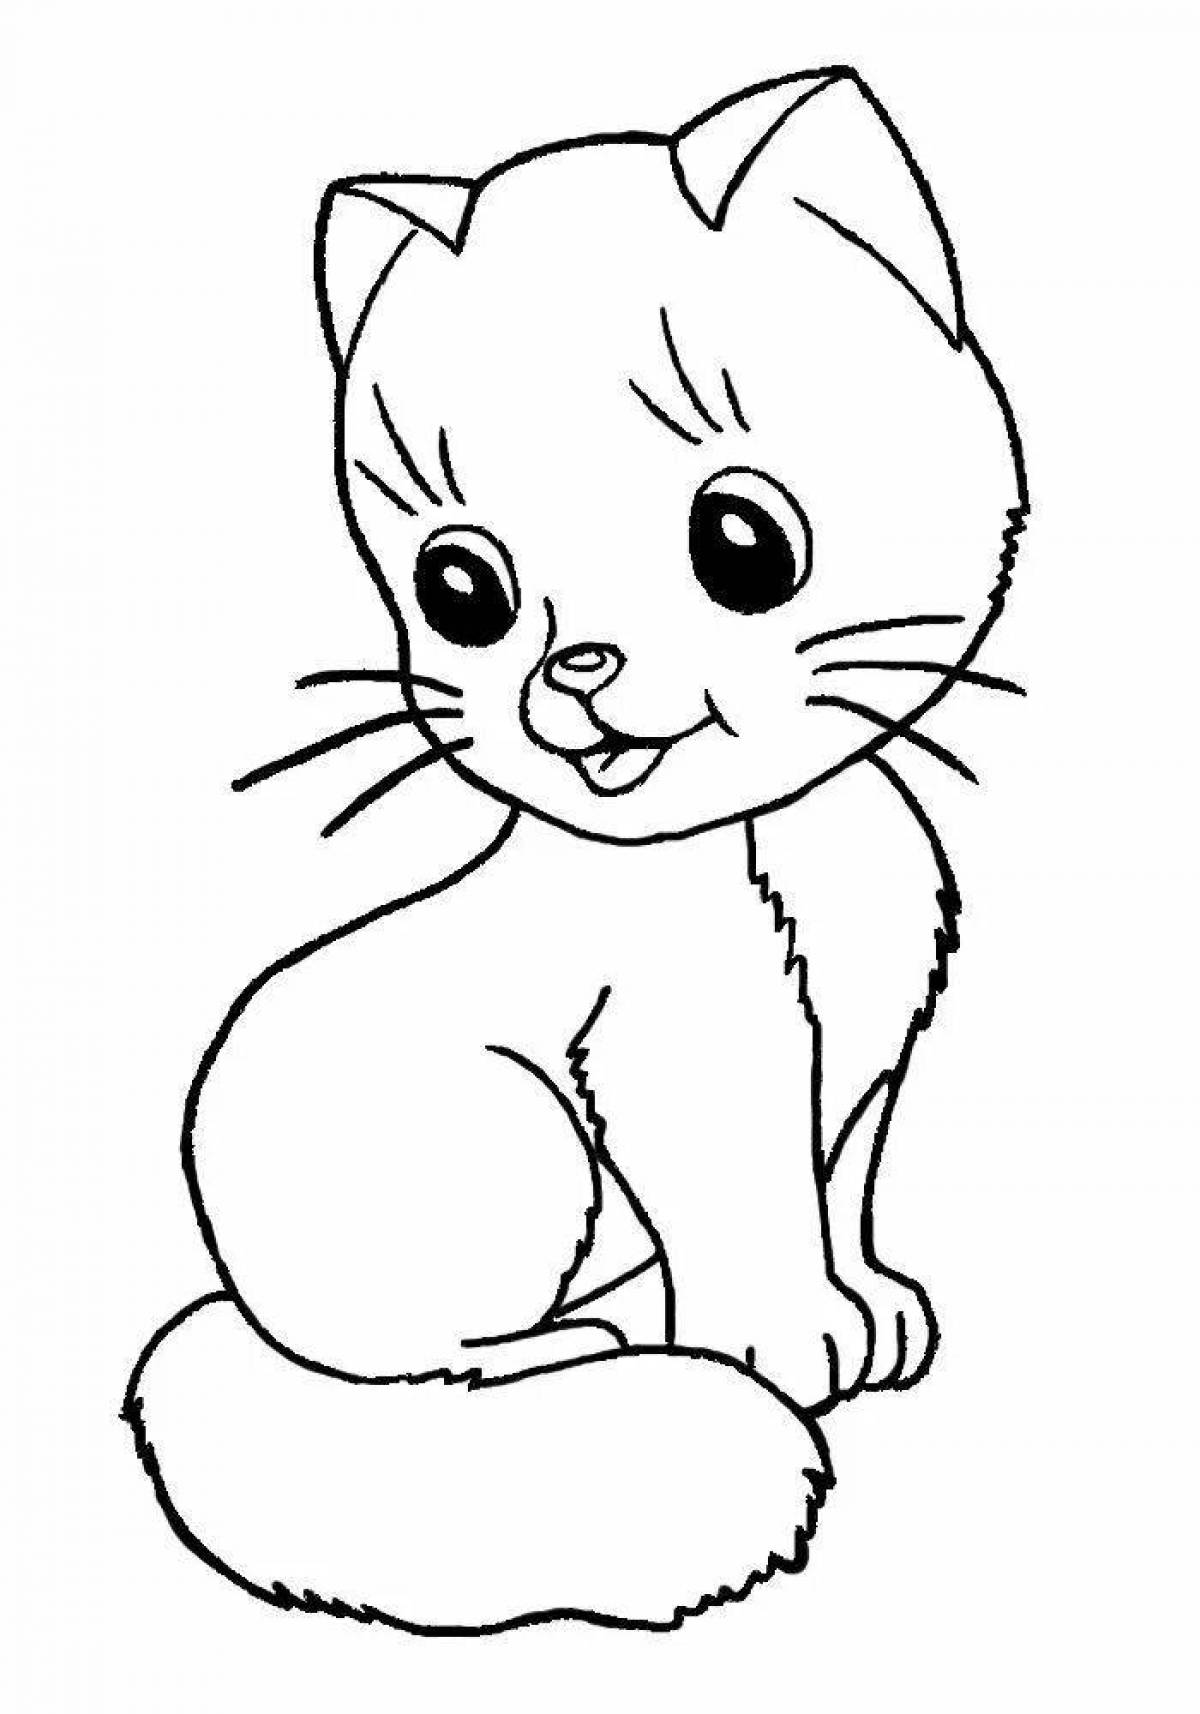 Coloring book playful 7 year old kitten